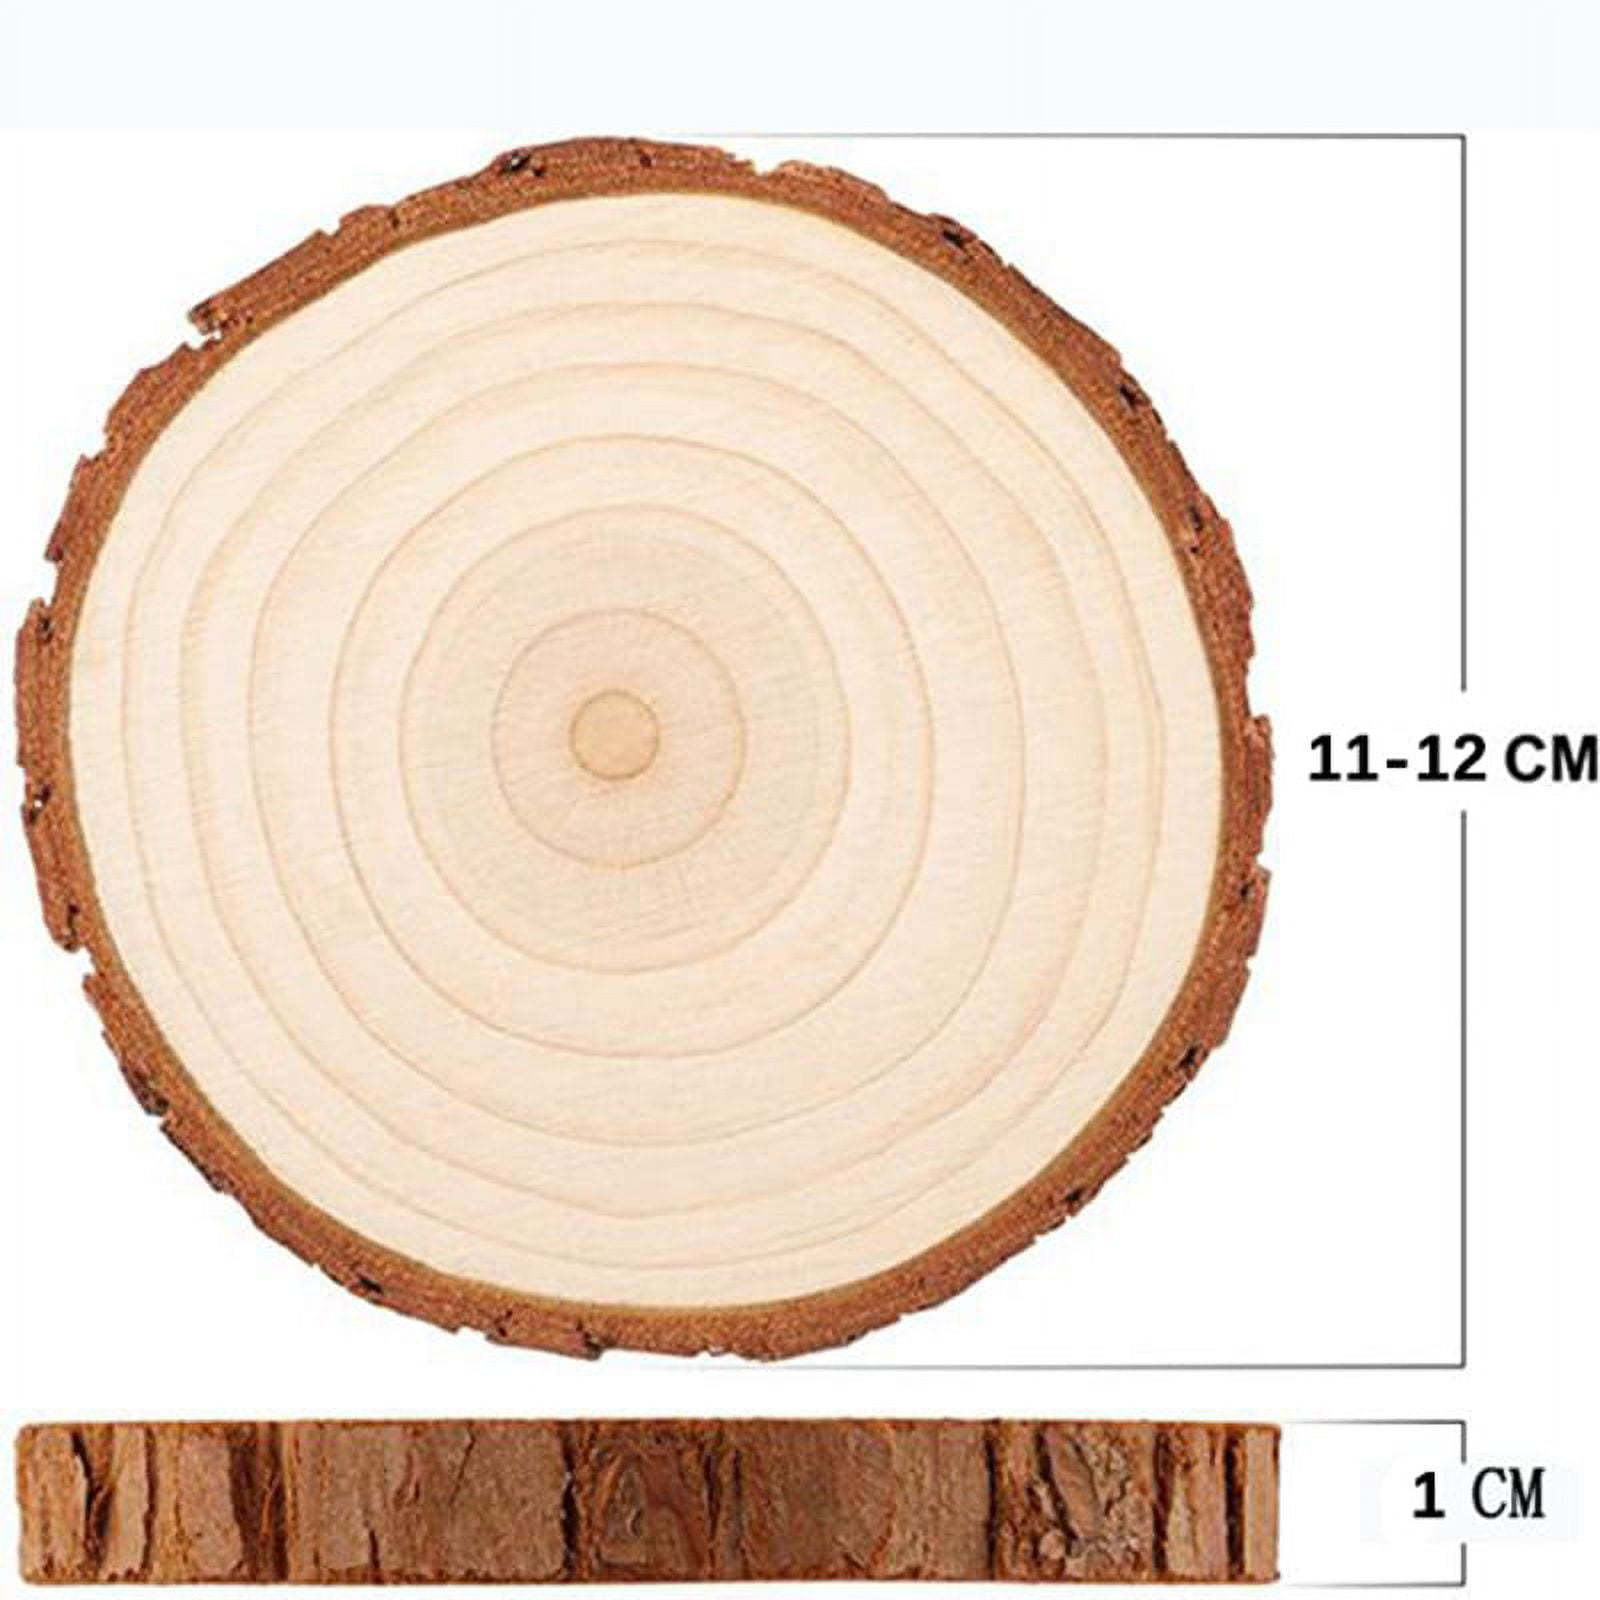 6pcs/lot Pine Wooden Chips Cut Pieces Wood Log Sheet Rustic Vintage Country  Style Wedding Decor Party Centerpieces Decoraciones - Party & Holiday Diy  Decorations - AliExpress